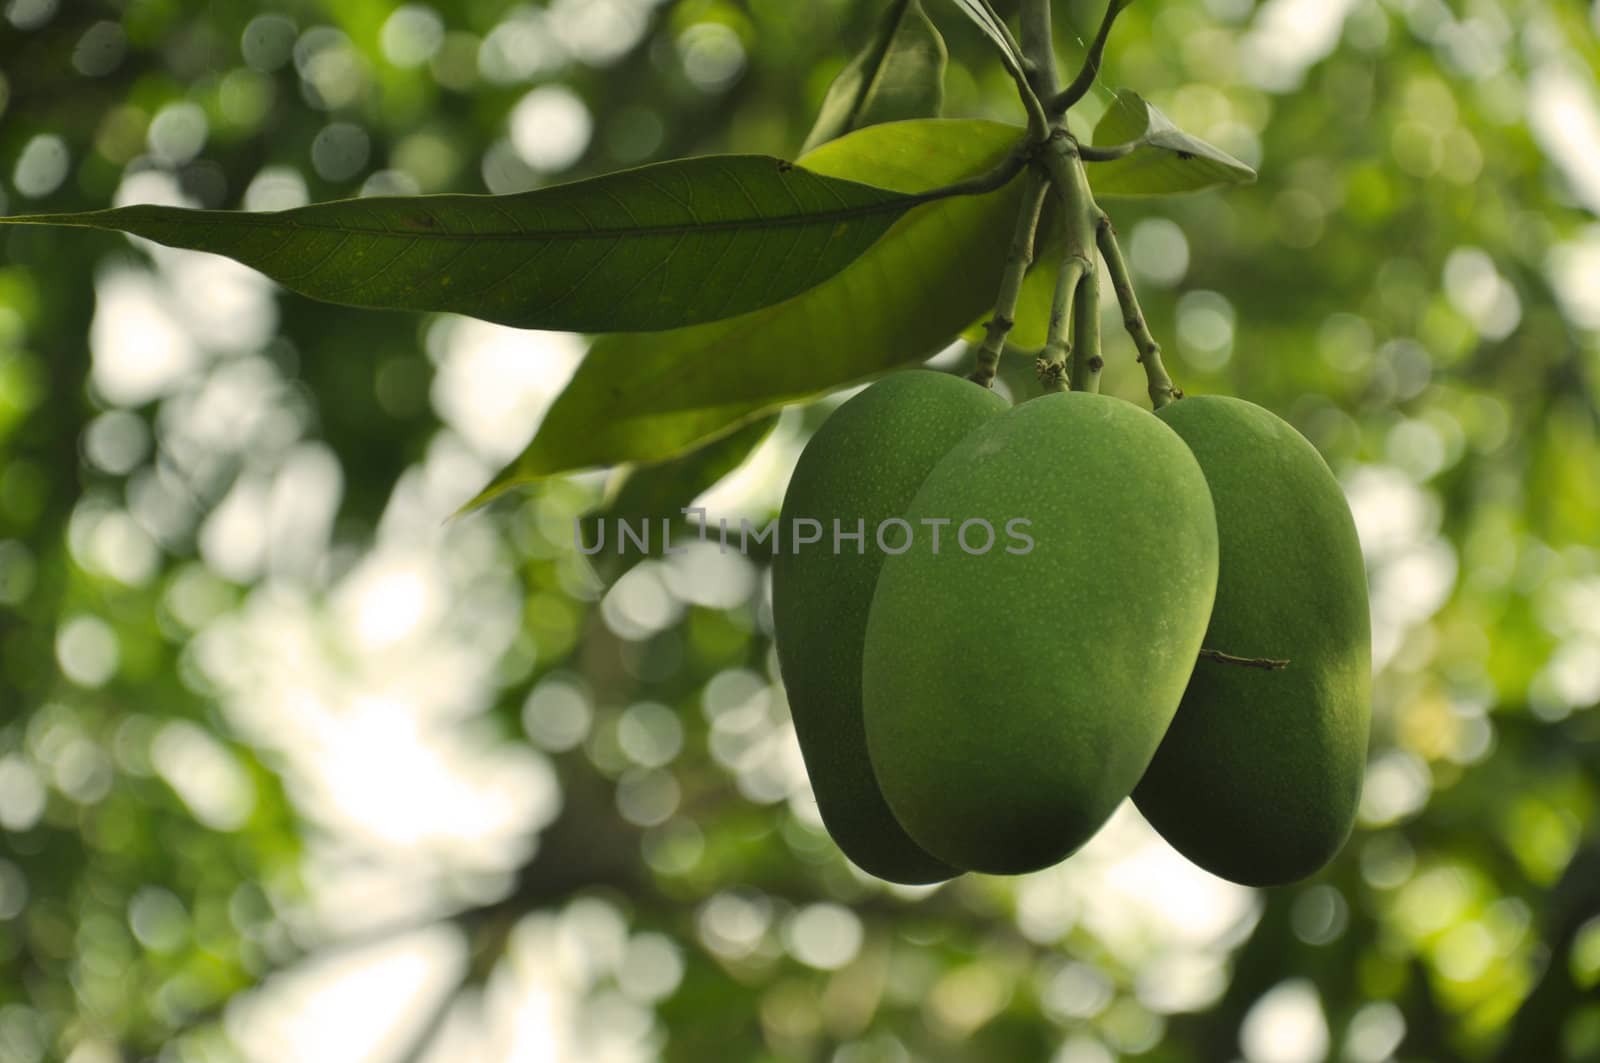 Indian Mangoes by kdreams02